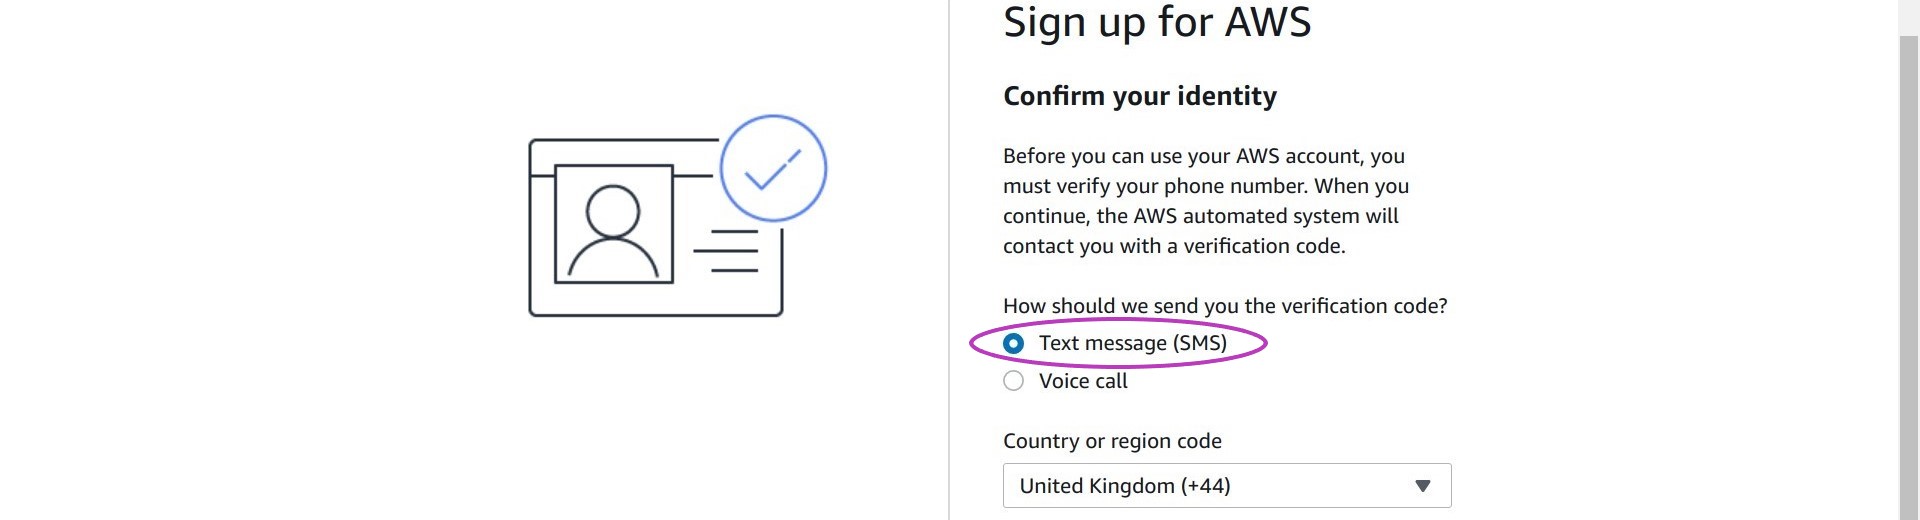 Screen shot of AWS sign up page in a browser with the option Text message (SMS) for user to receive identity verification code circled